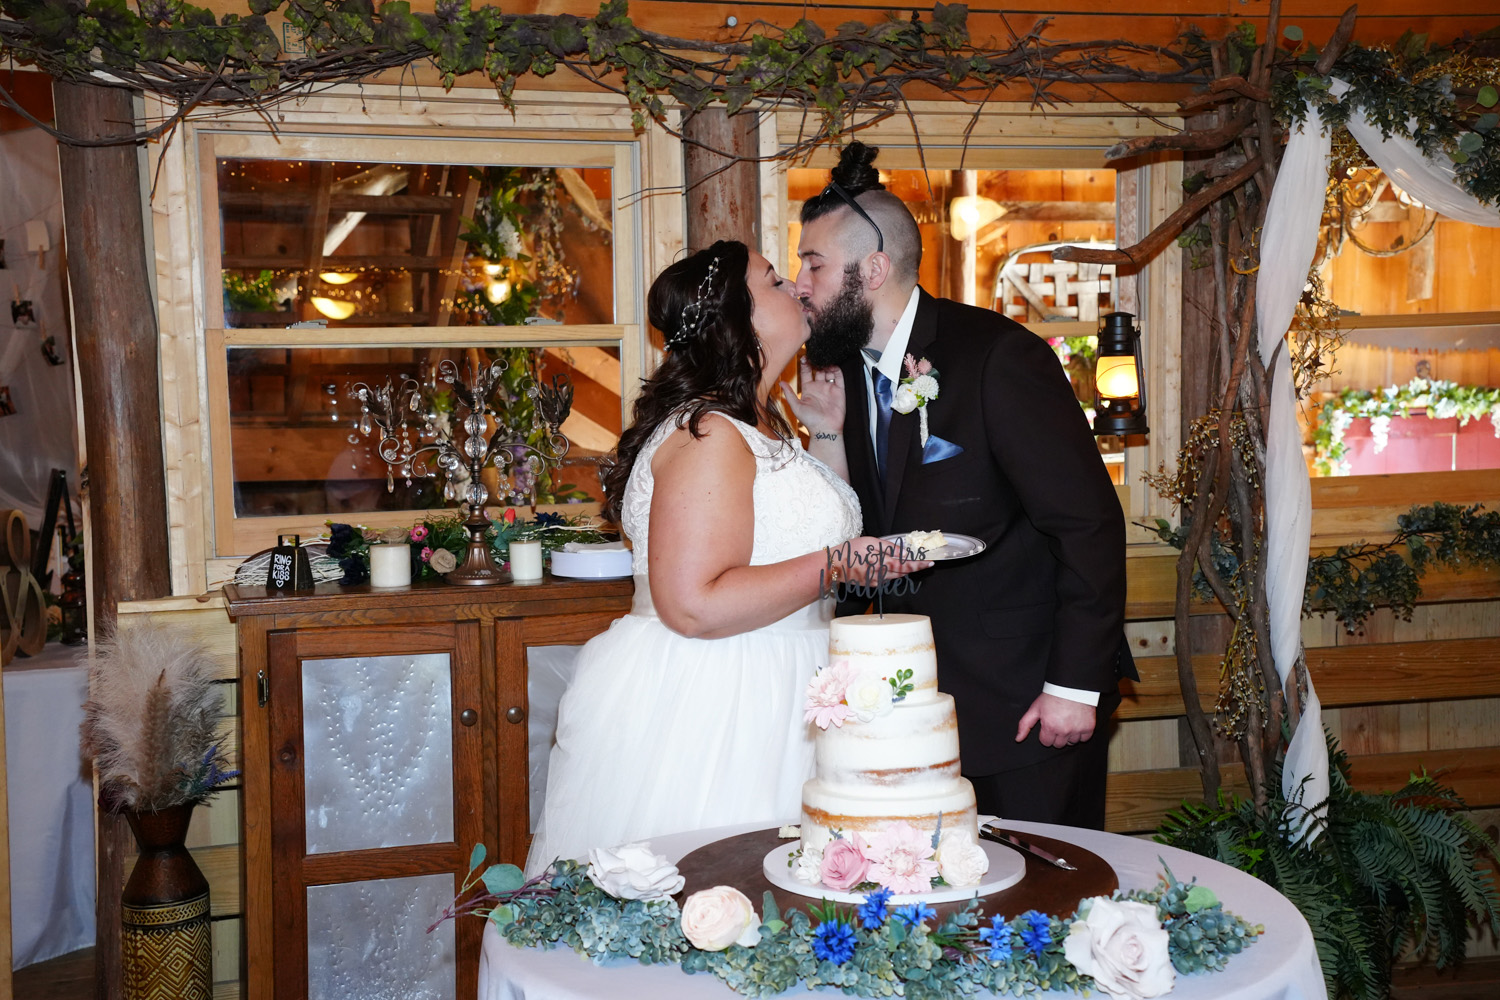 Bride and groom kissing in front of their wedding cake in a barn wedding venue with country chic decor